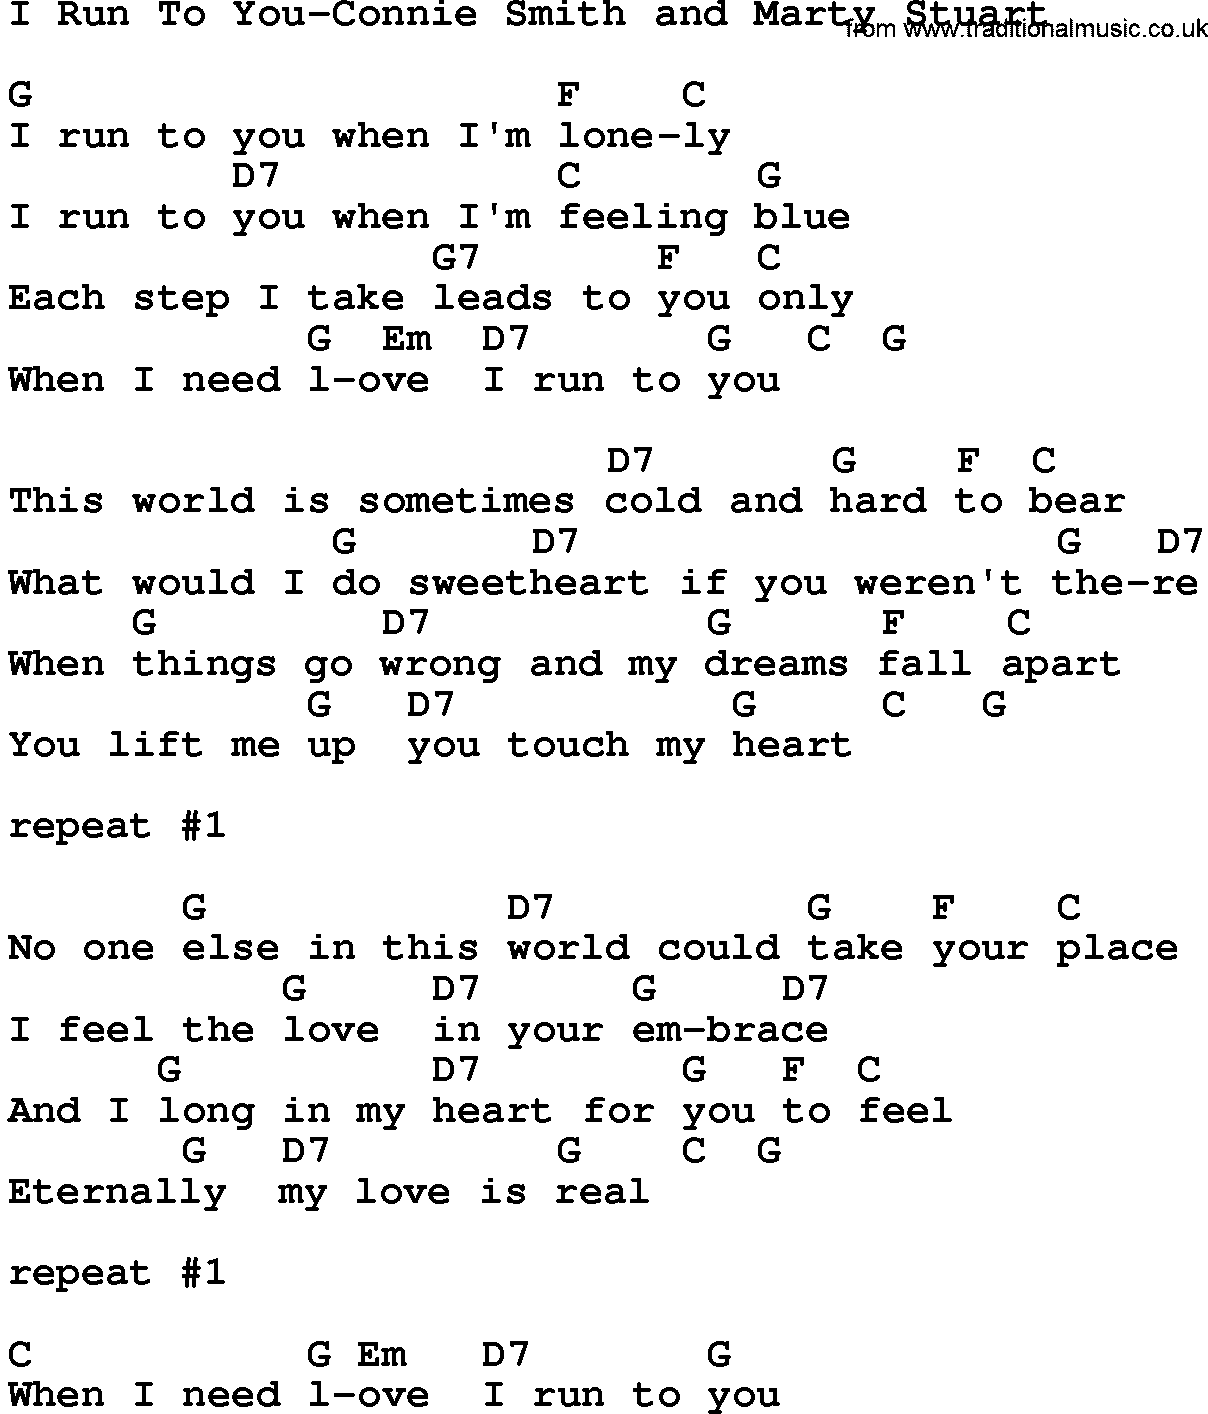 Country music song: I Run To You-Connie Smith And Marty Stuart lyrics and chords